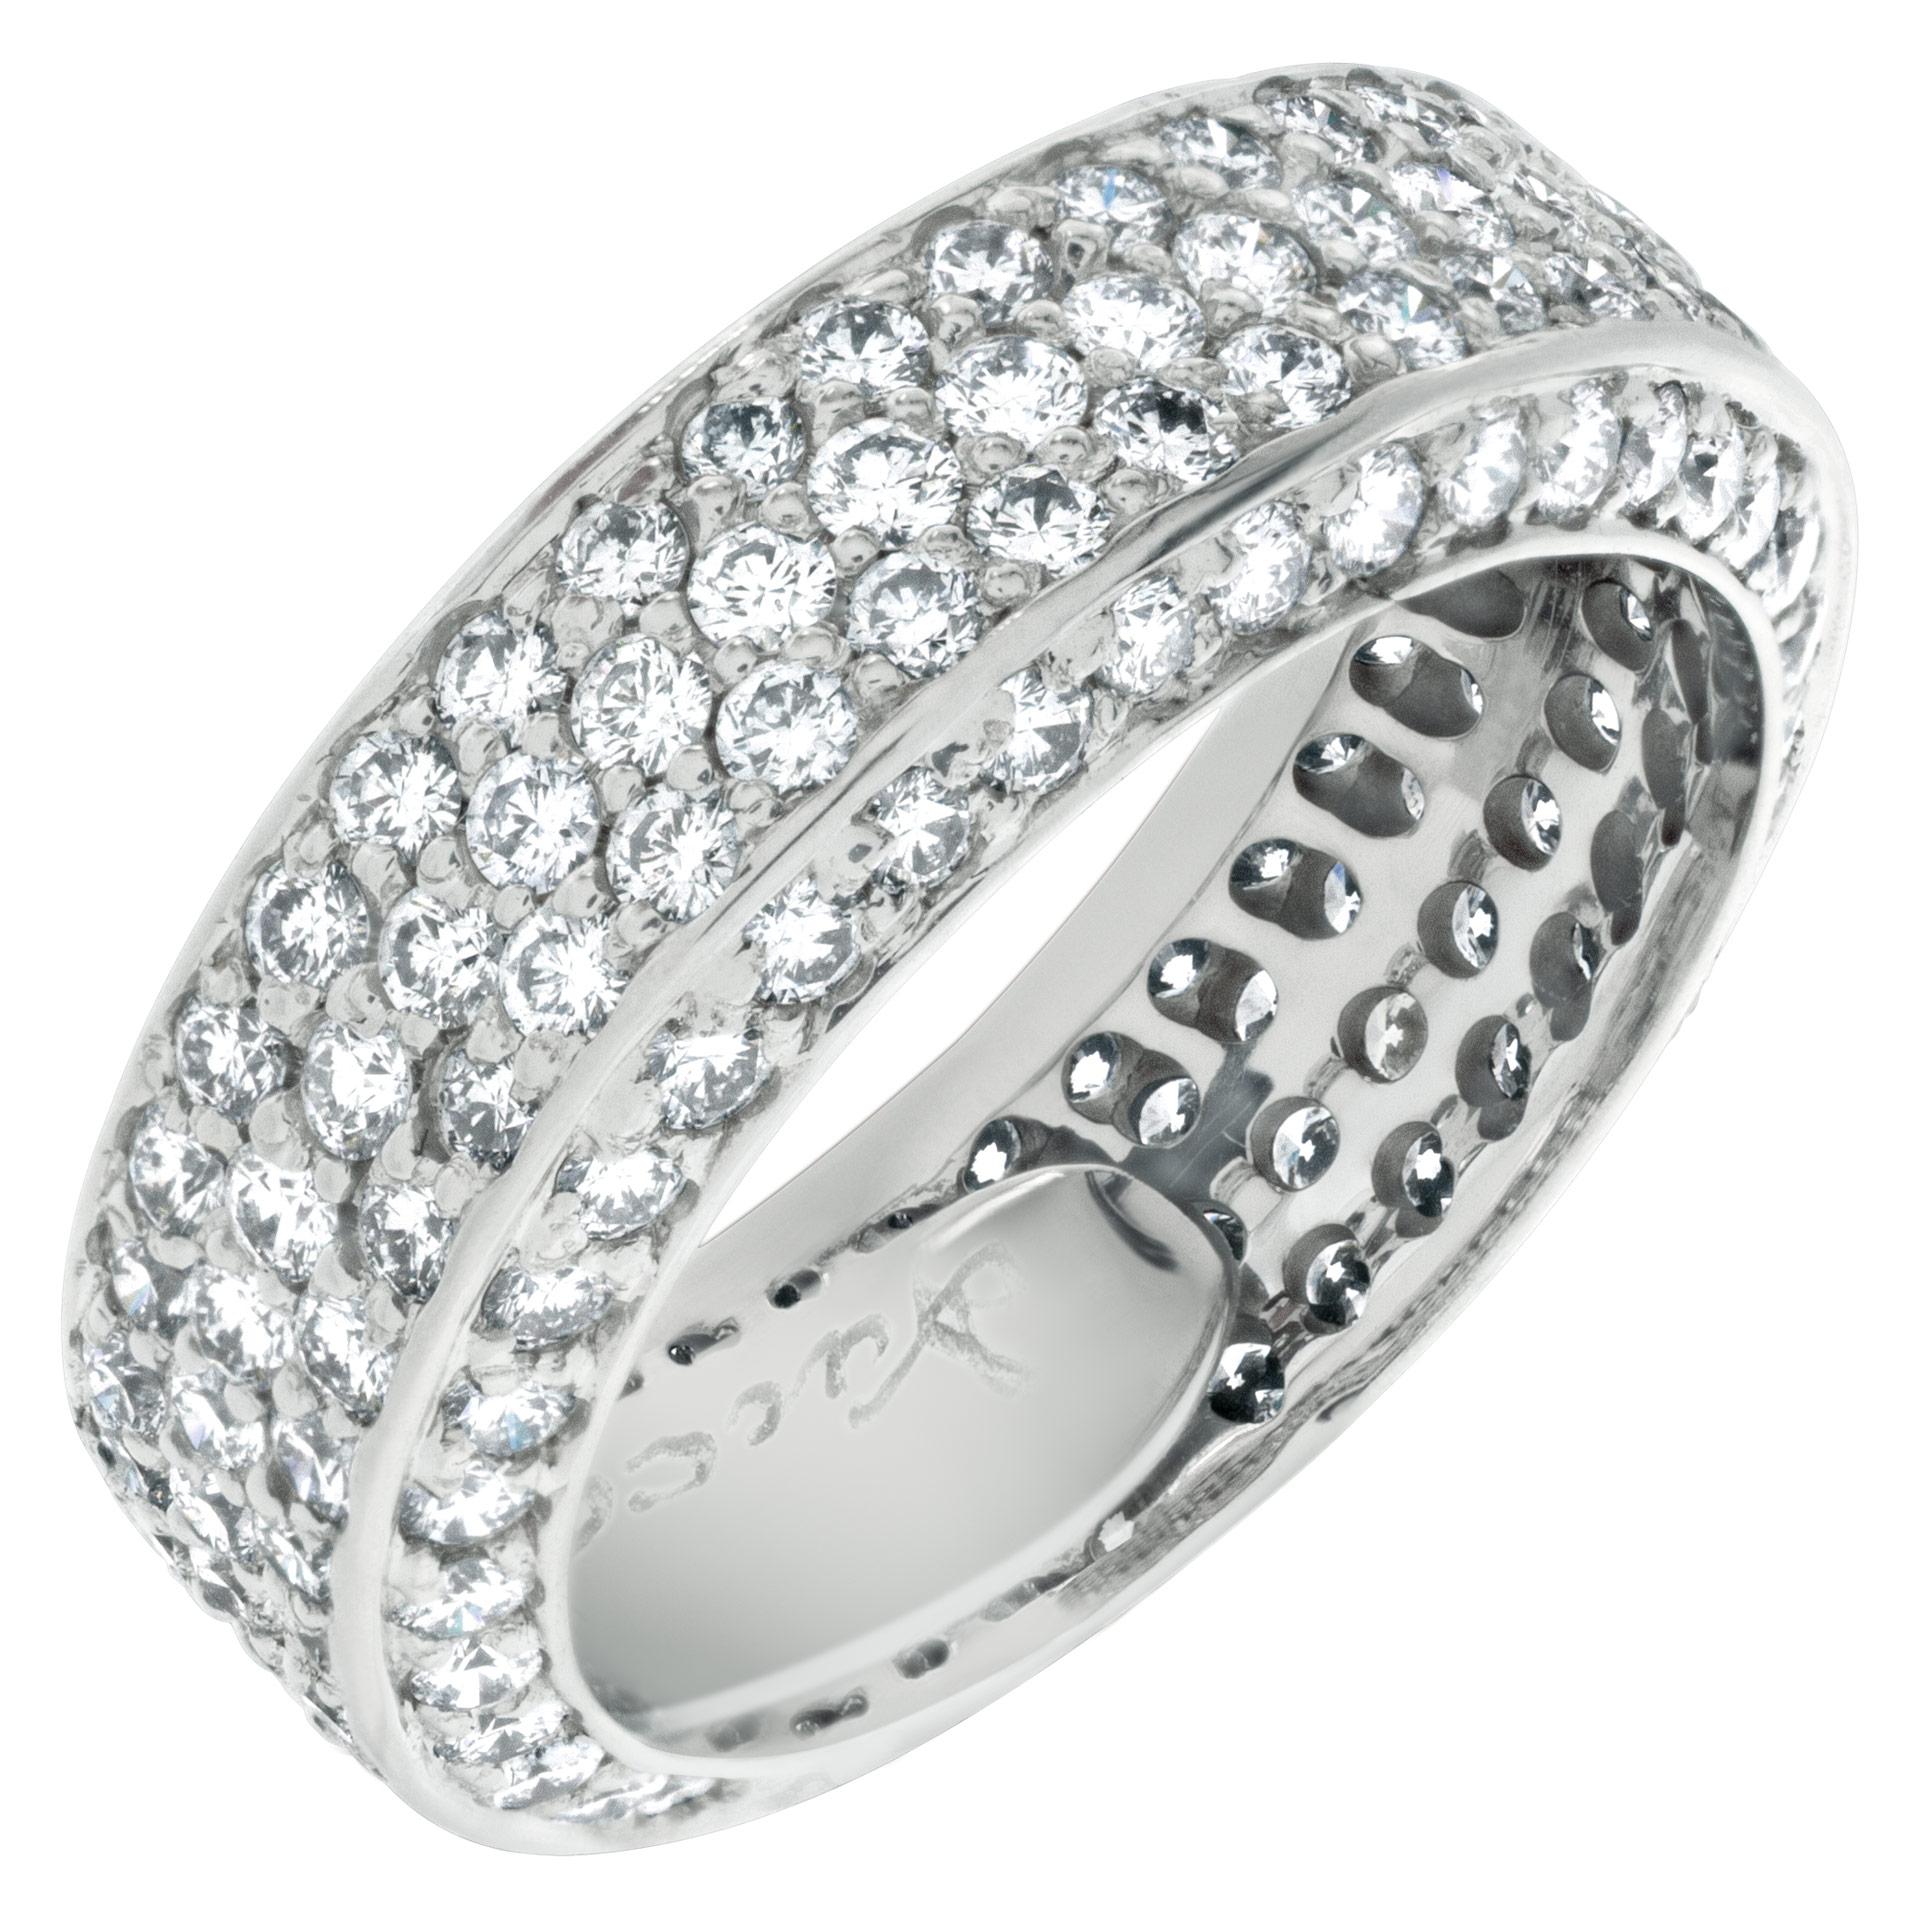 Dazzling pave diamond eternity band with over 1.5 carat full cut round brilliant G-H color, VS clarity diamonds set in 18k white gold. Size: 6. Width: 6mm